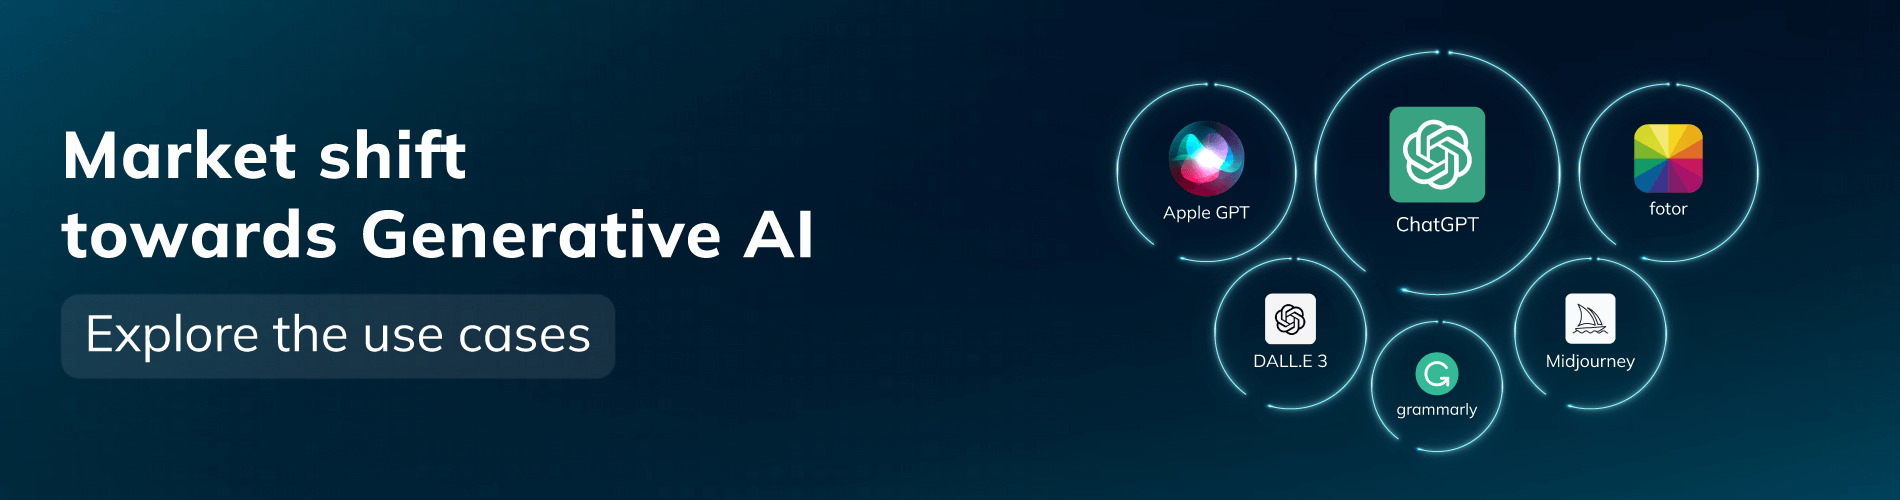 Generative AI Industry Use Cases